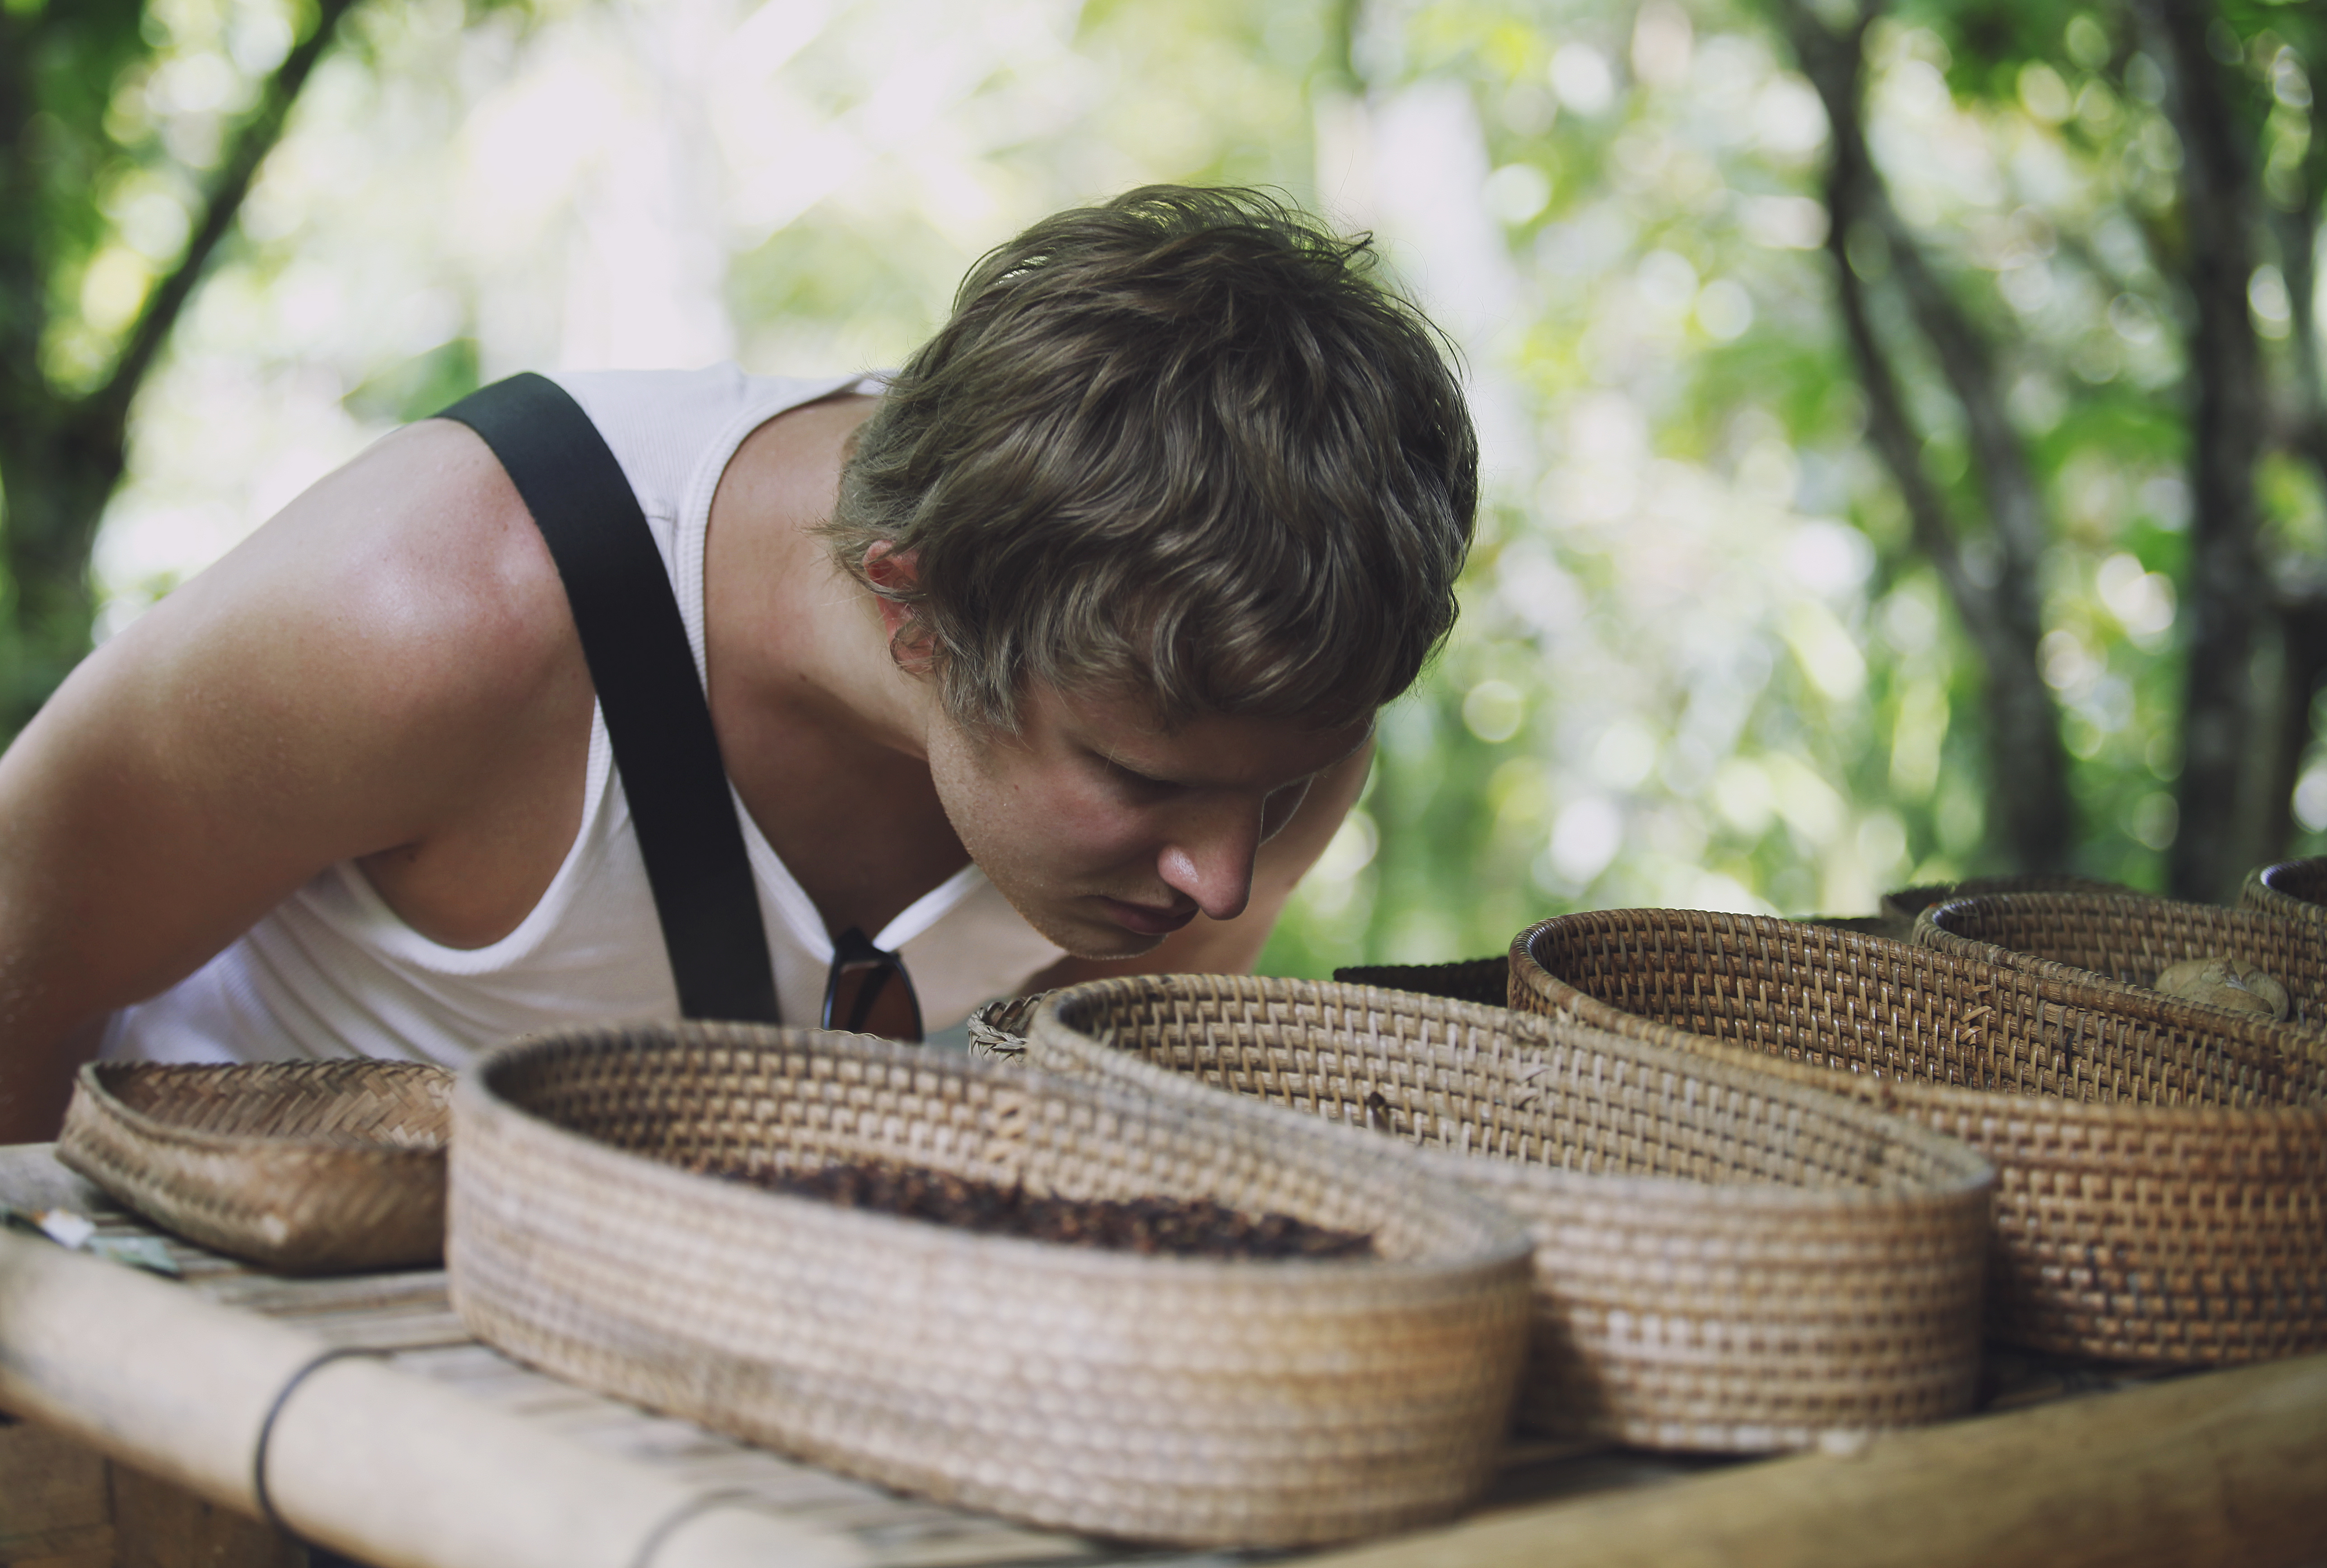 Man examines exotic spices in wicker baskets on the market